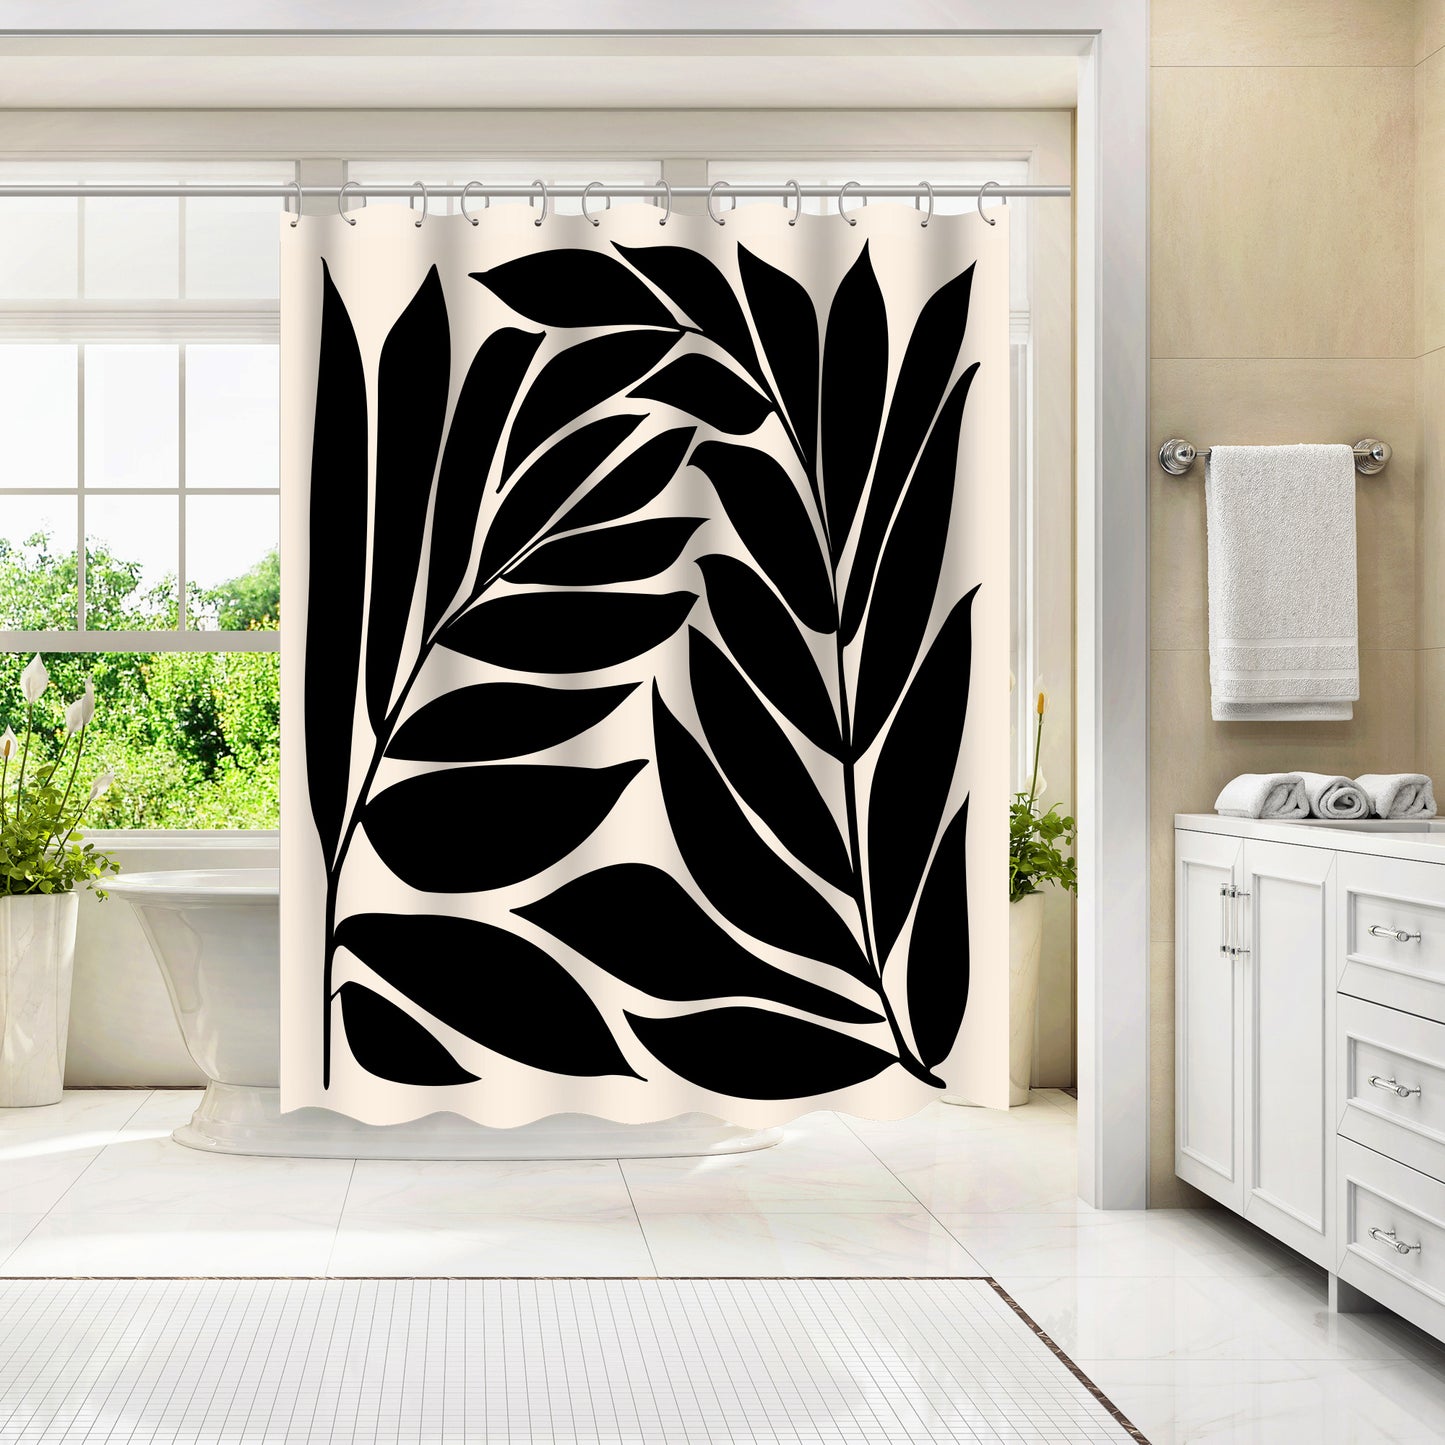 71" x 74" Boho Shower Curtain with 12 Hooks, Black Seagrass Shapes by Modern Tropical